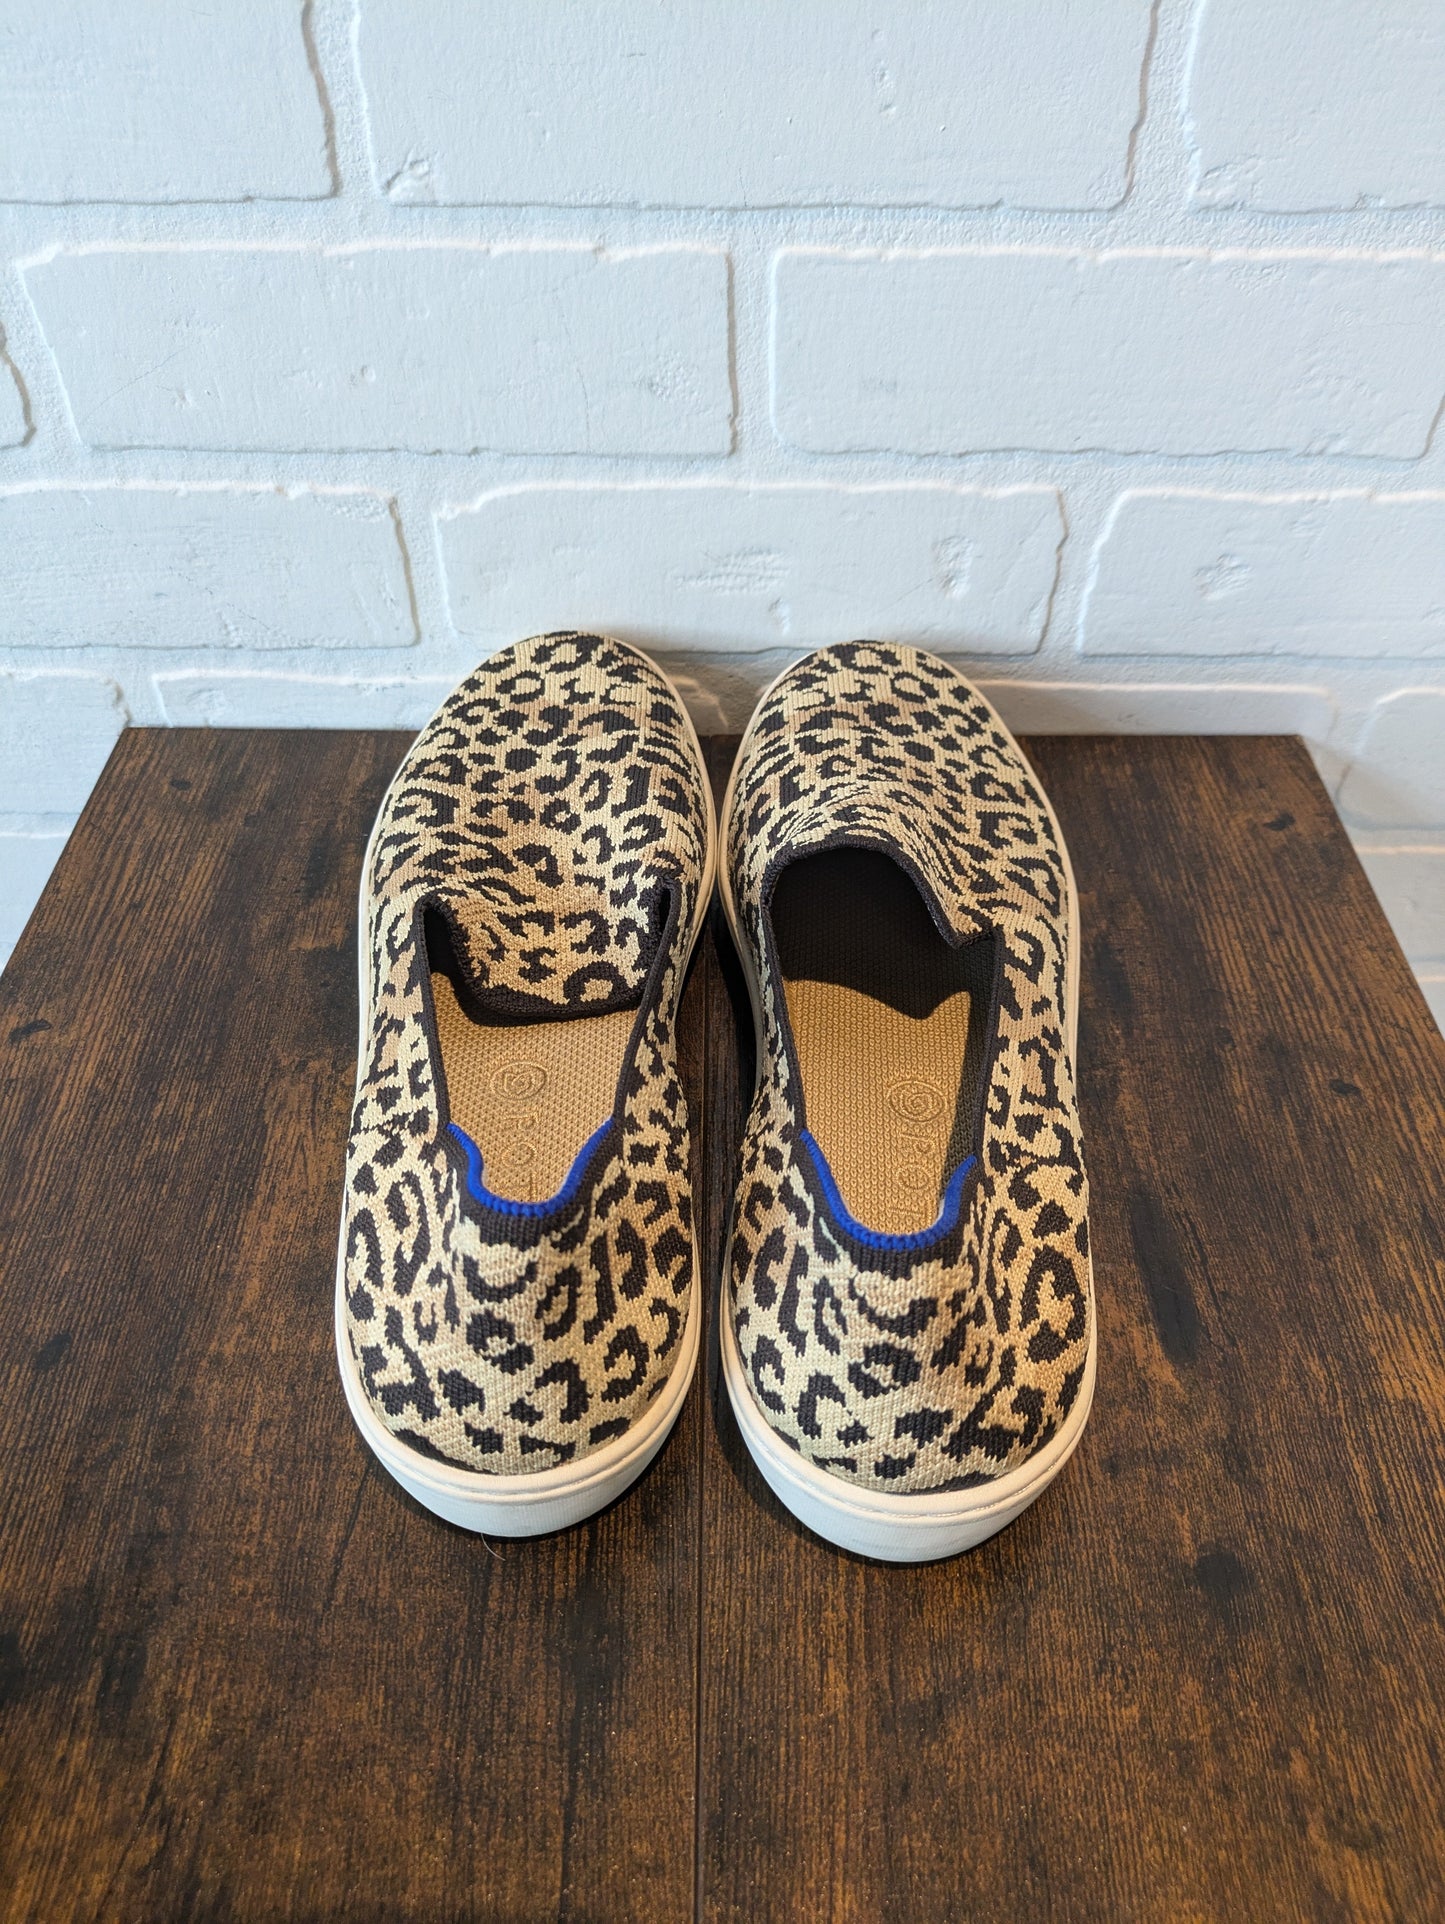 Animal Print Shoes Flats Rothys, Size 10